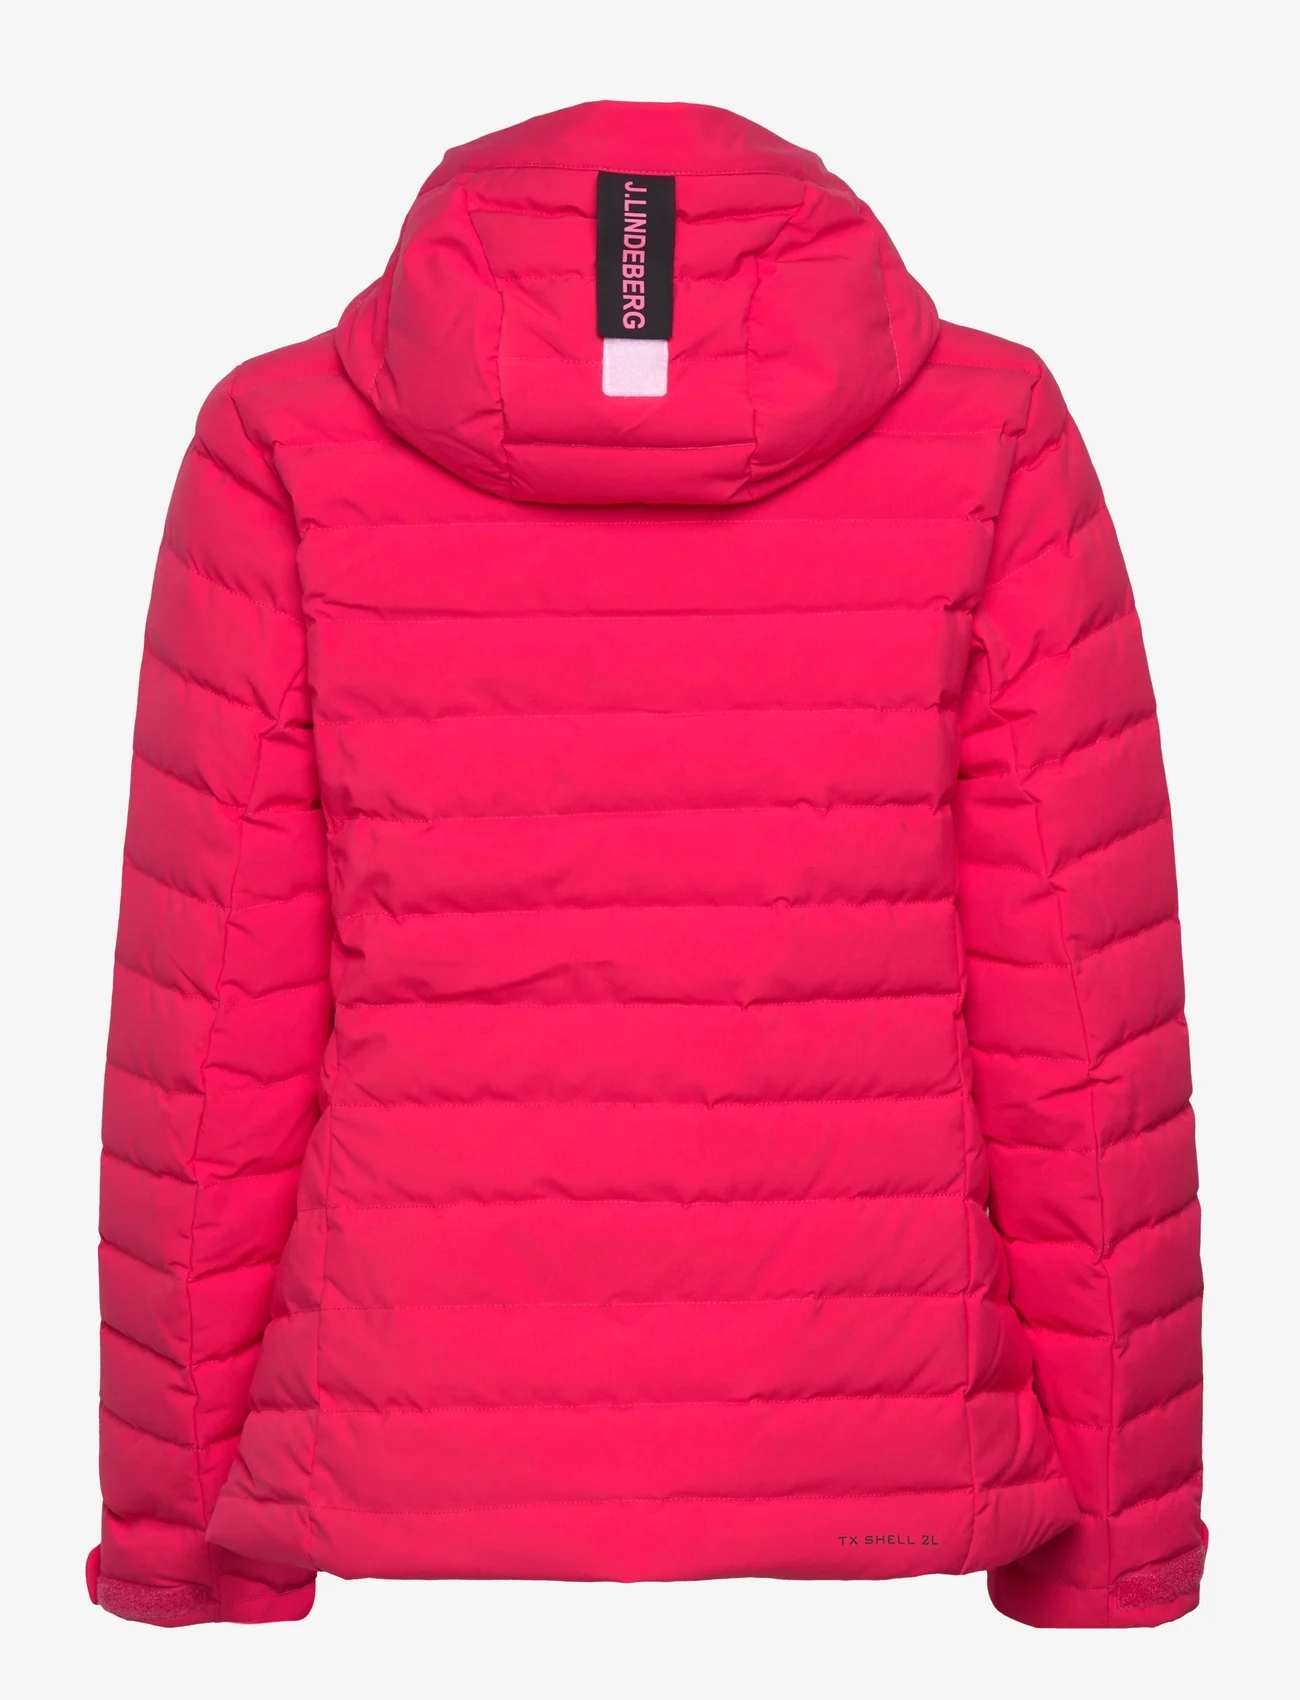 J. Lindeberg - W Thermic Down Jacket - winter jacket - rose red - 1